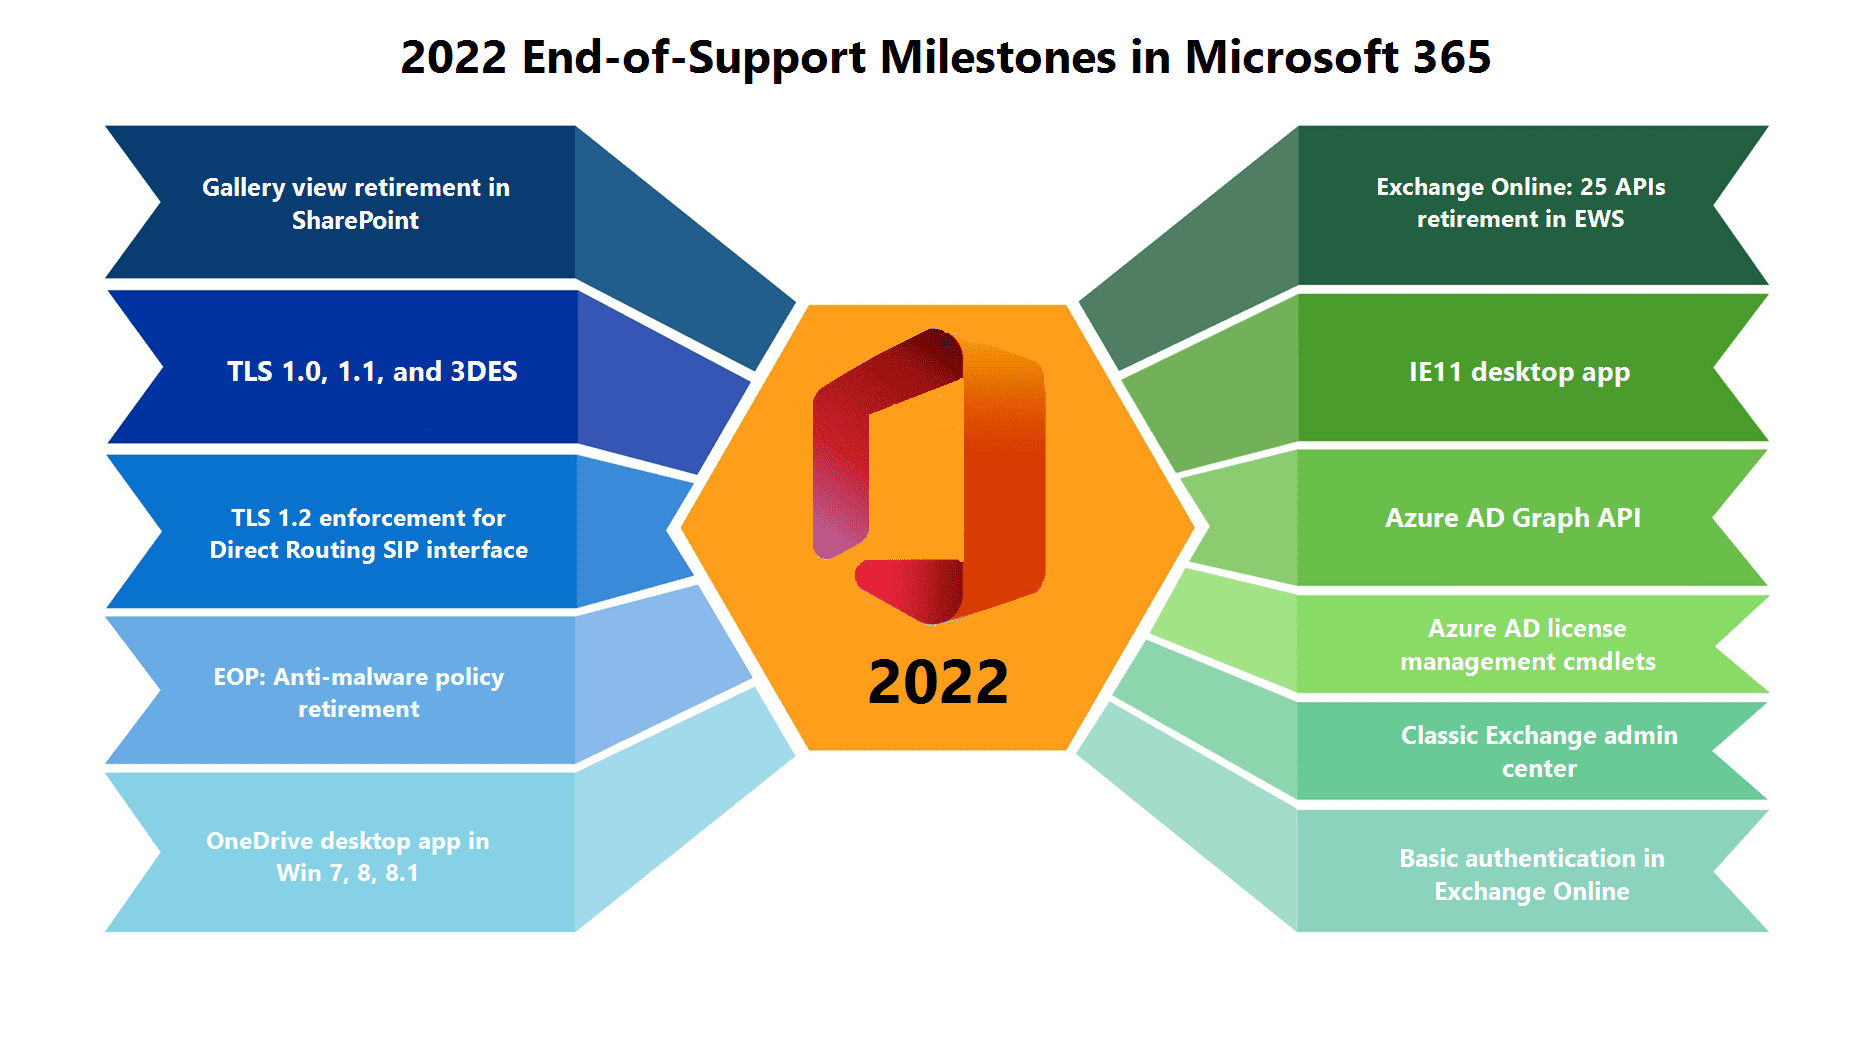 Microsoft Extended Support